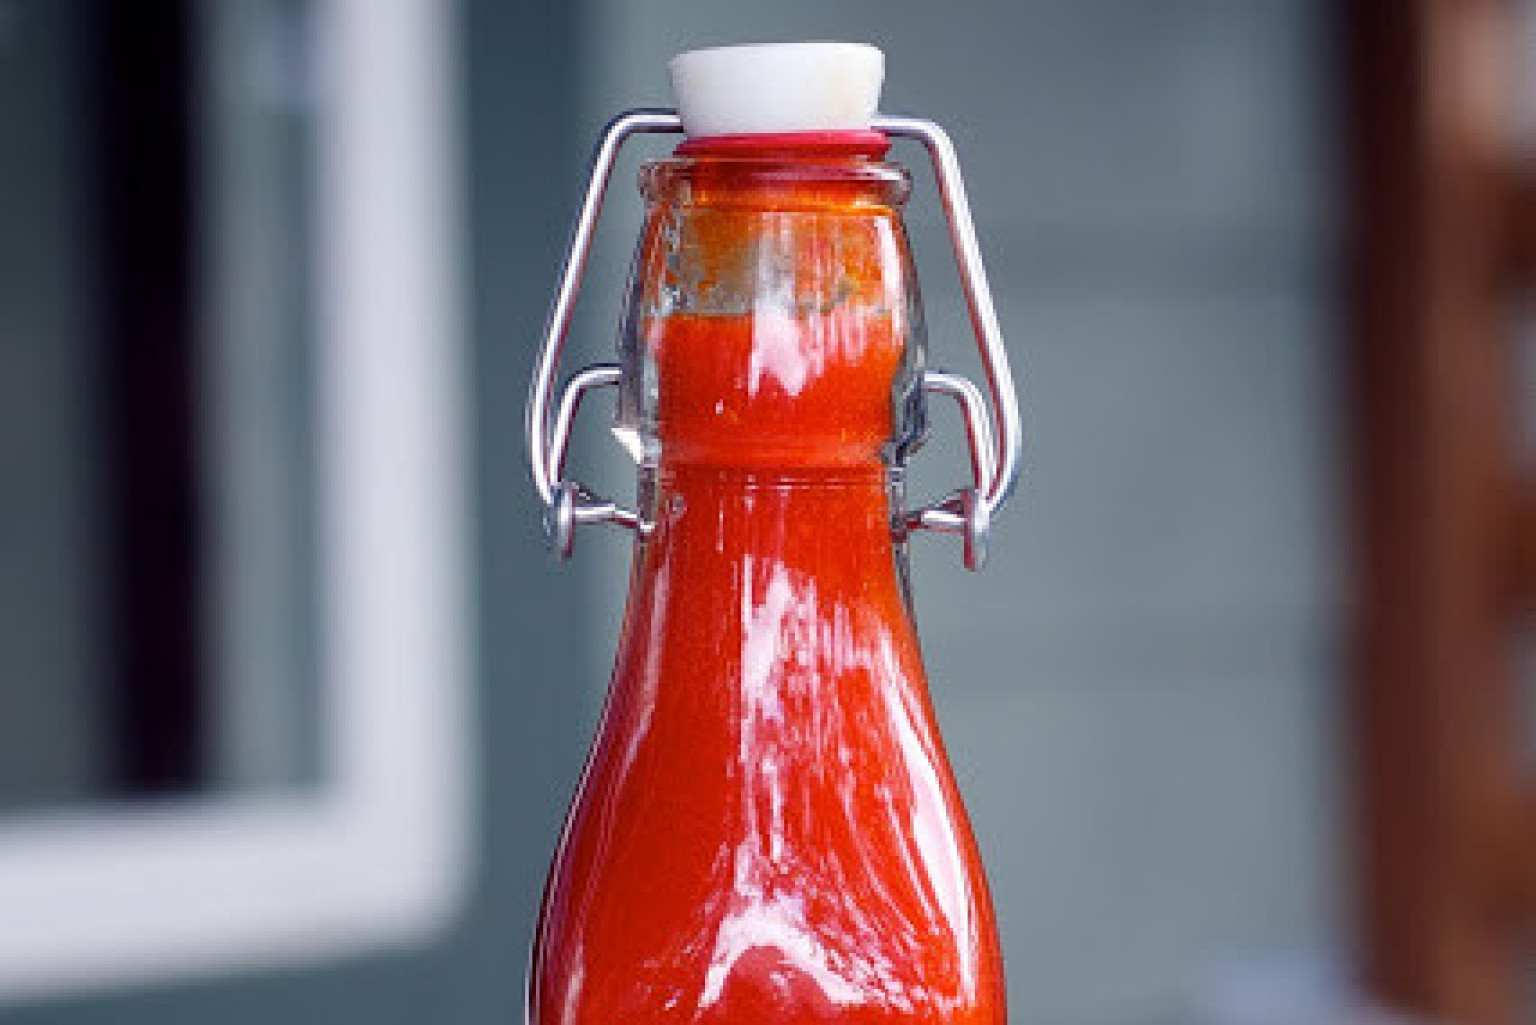 What is a good recipe for homemade hot pepper sauce?